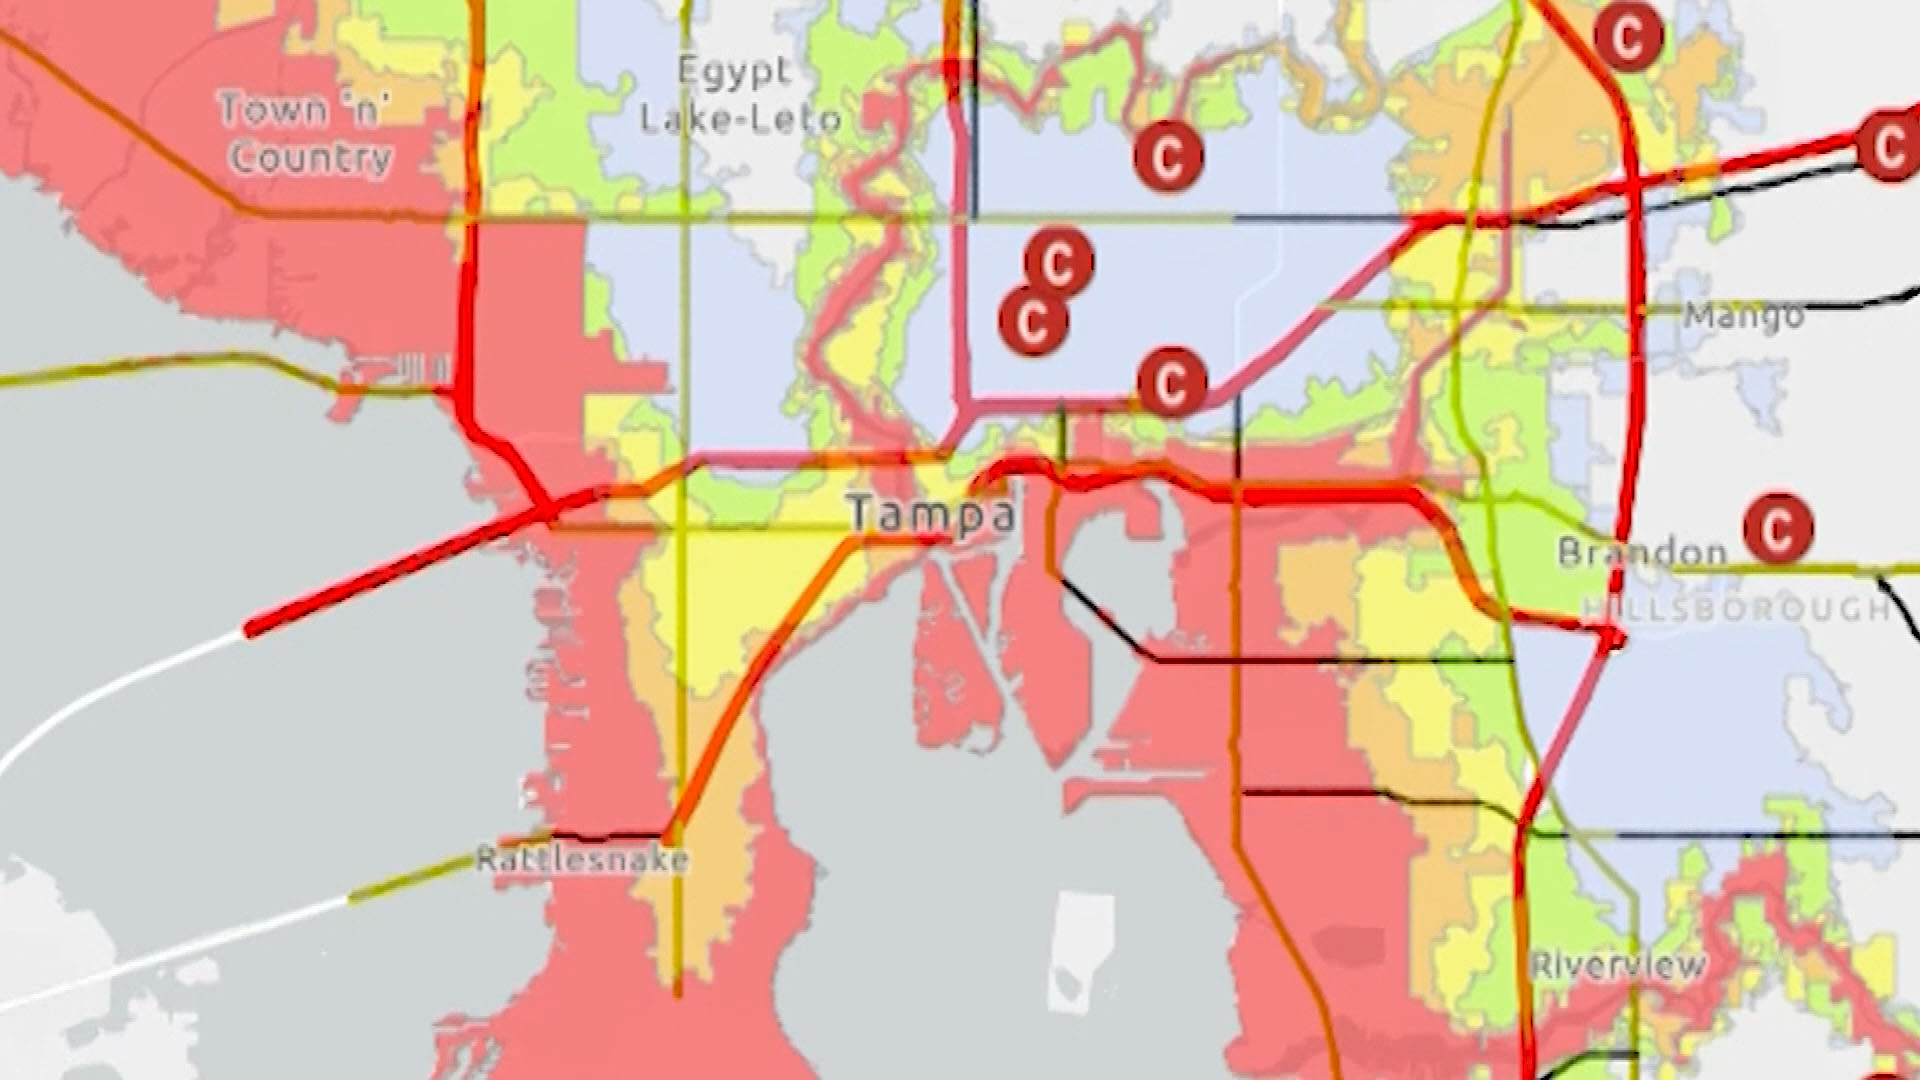 Hillsborough County - County Map Now Places Many Residents in New  Evacuation Zones